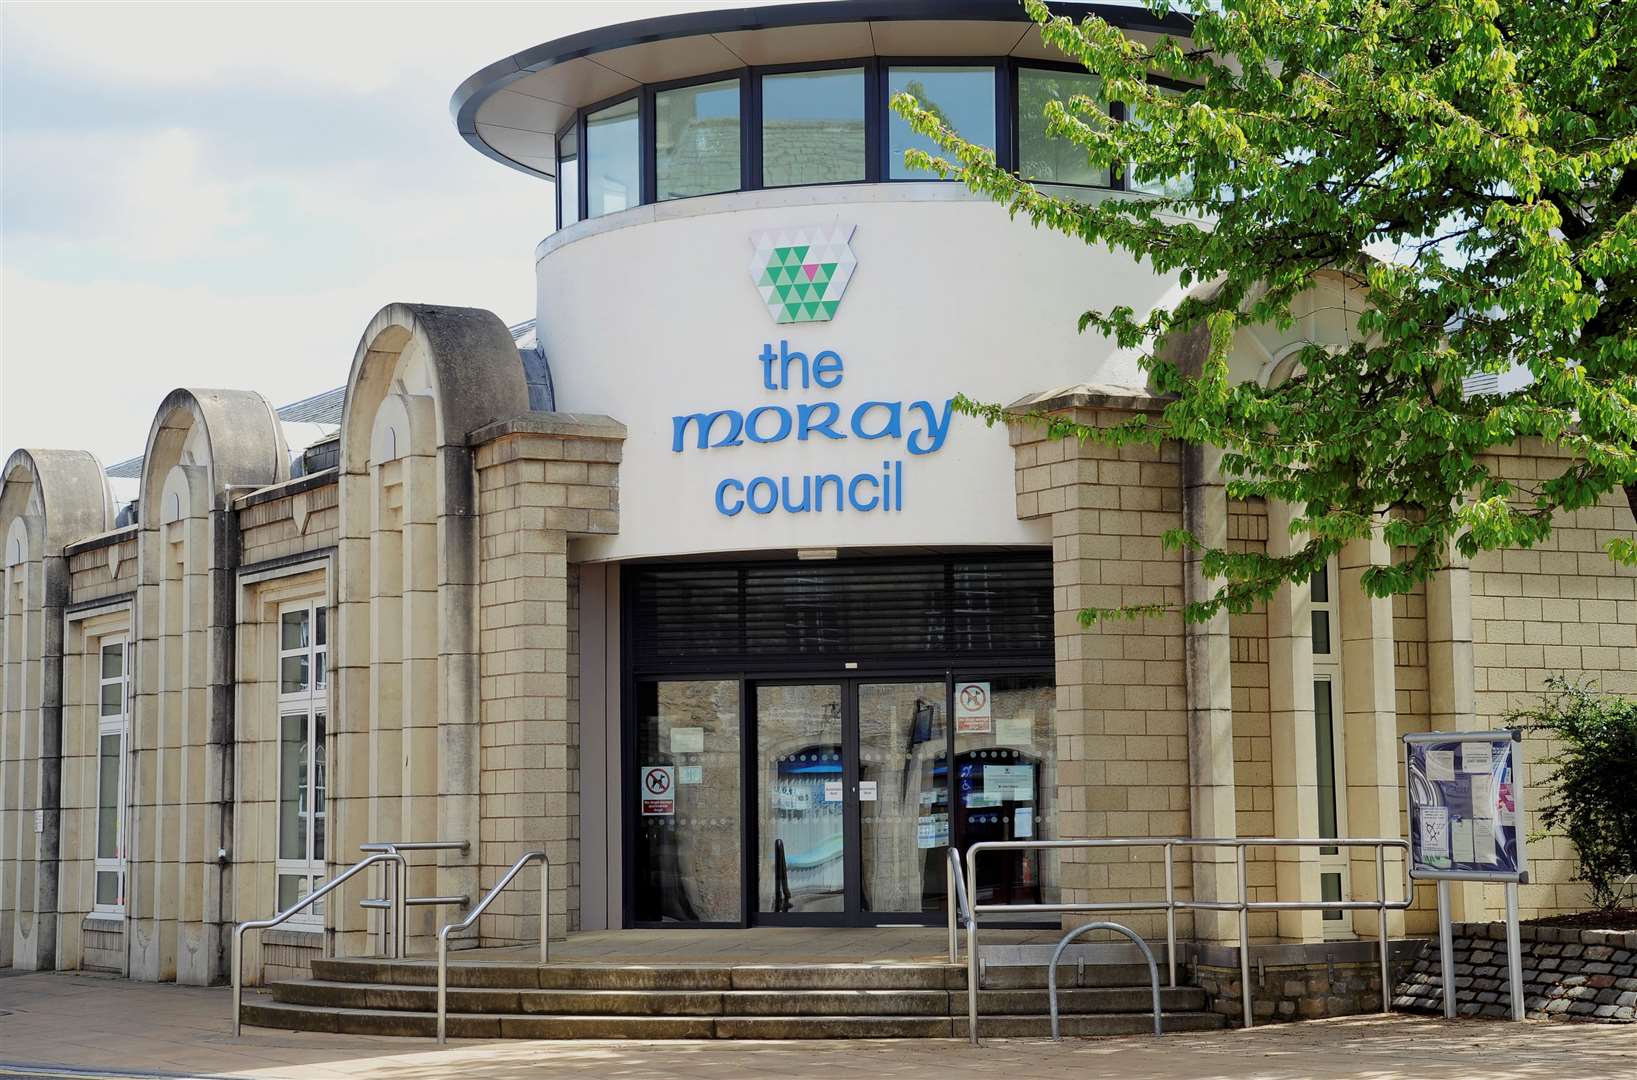 Members of the public are being asked to give their views on Moray Council's Community Learning and Development team activities.